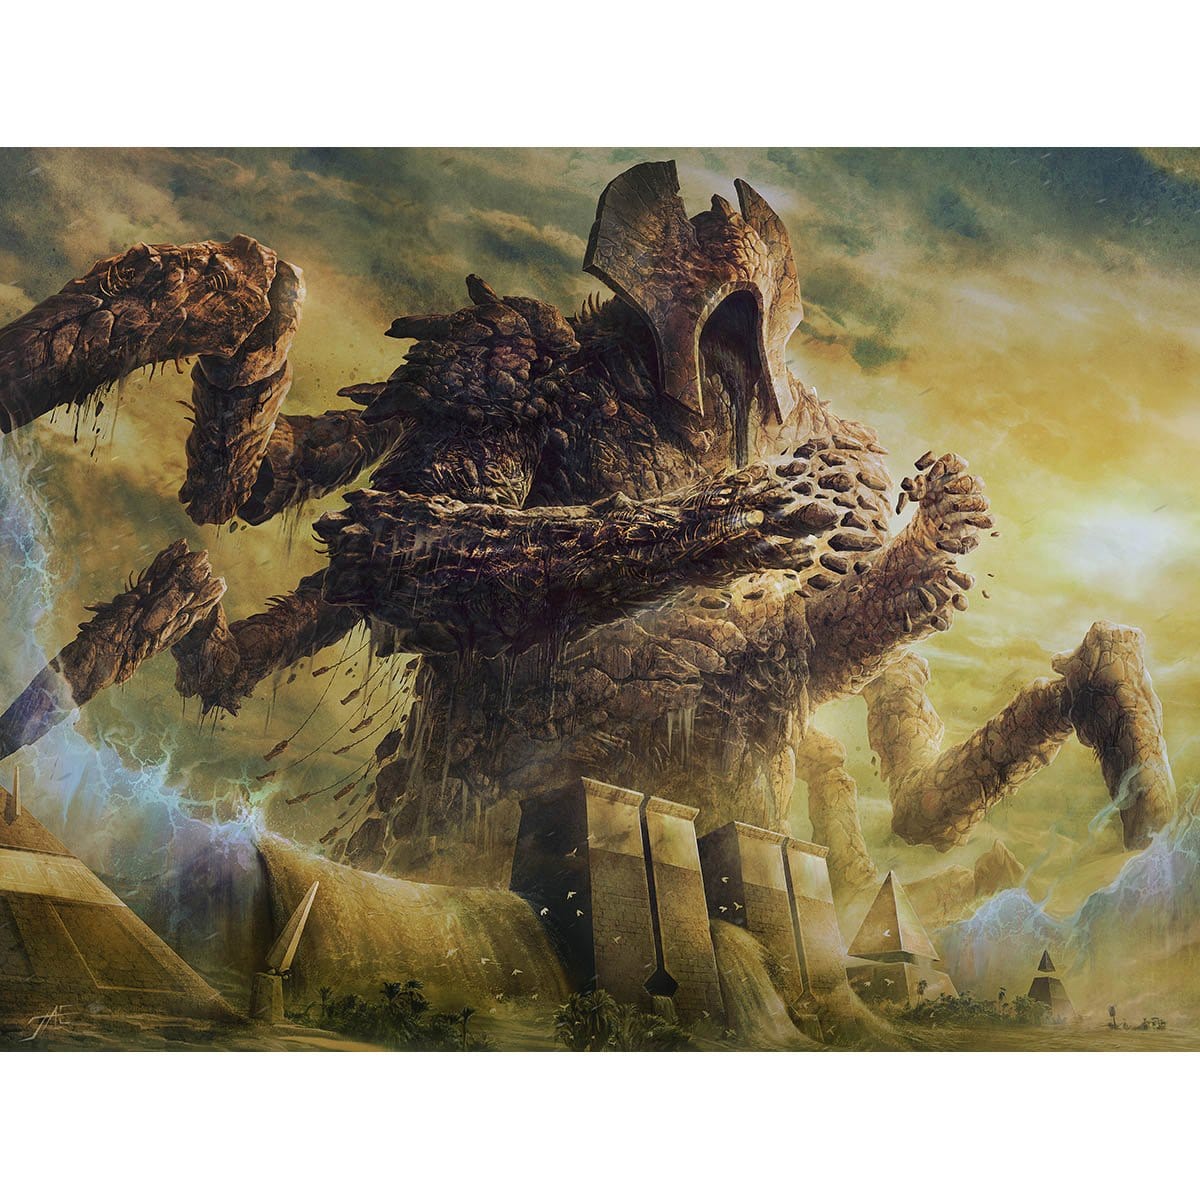 Lord of Extinction Print - Print - Original Magic Art - Accessories for Magic the Gathering and other card games